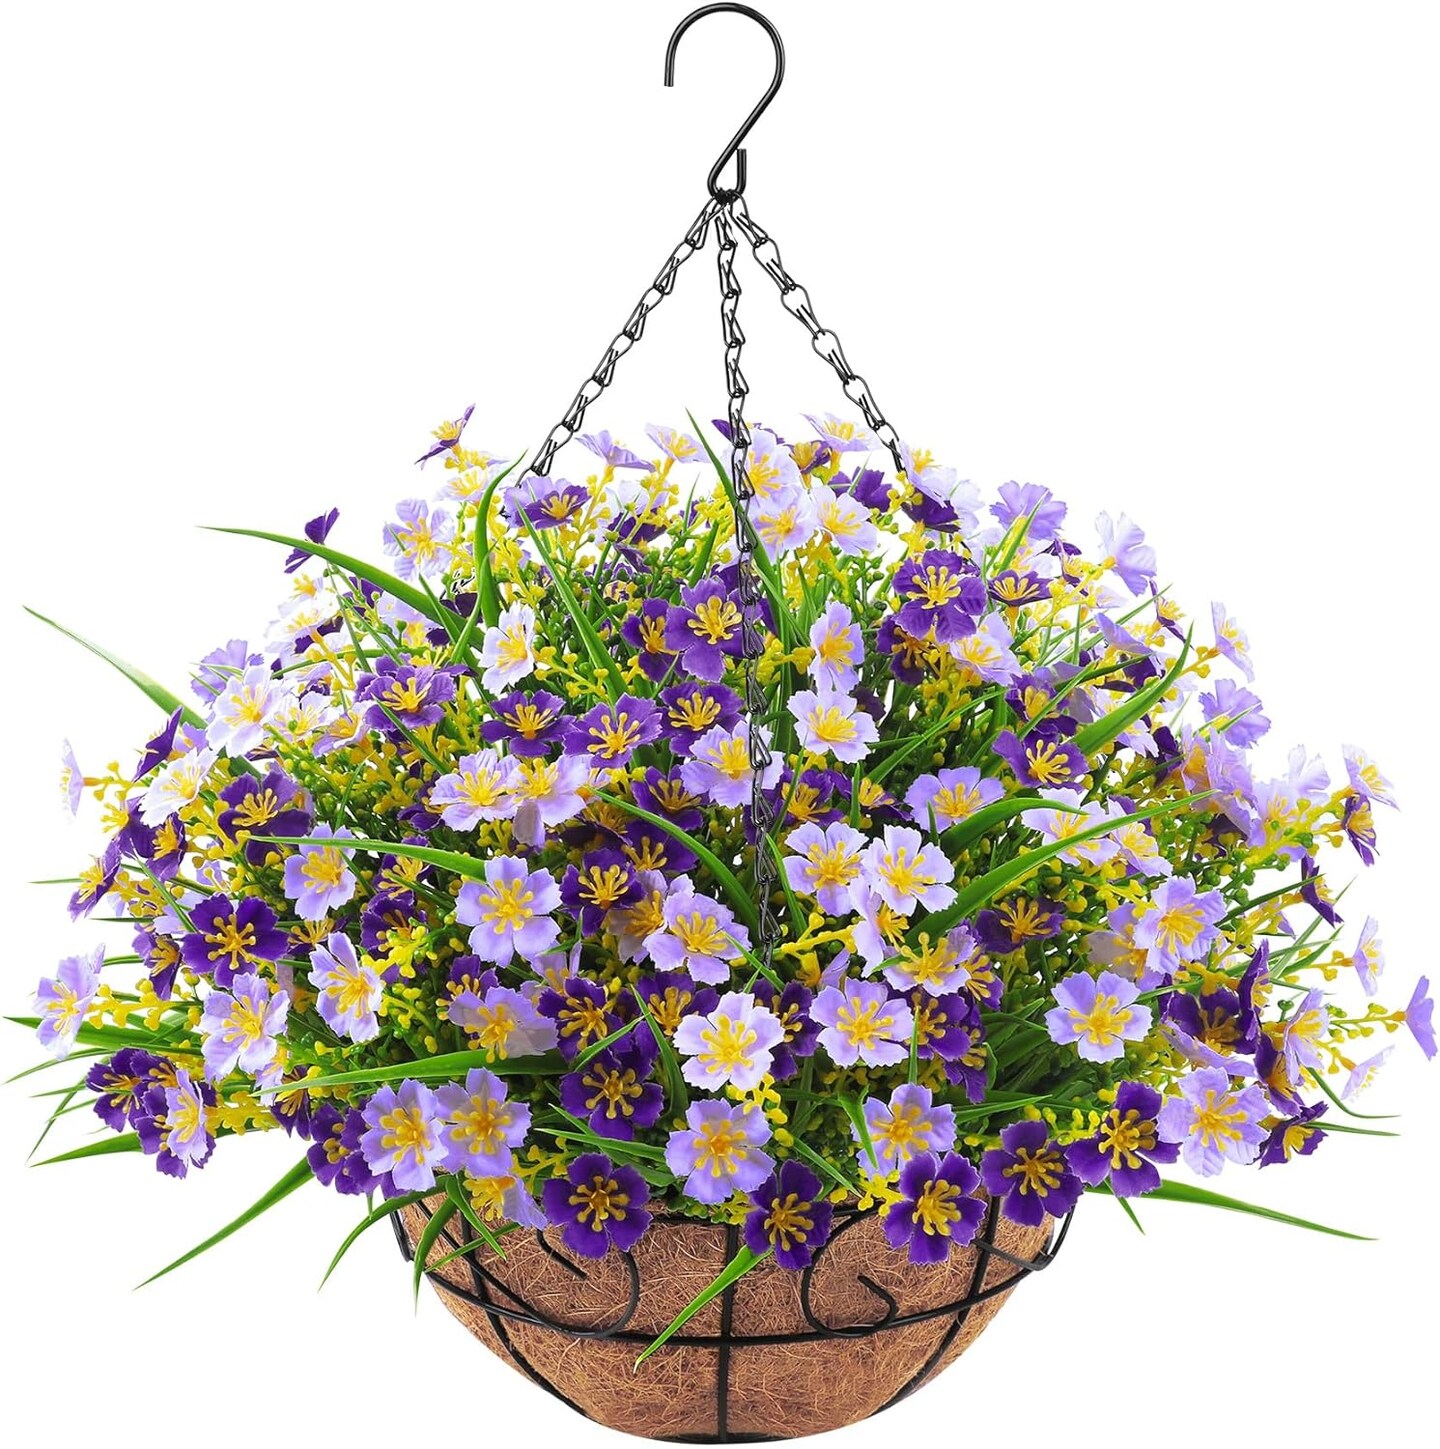 Everlasting Spring Charm: Artificial Hanging Flowers with Coconut-Lined Basket